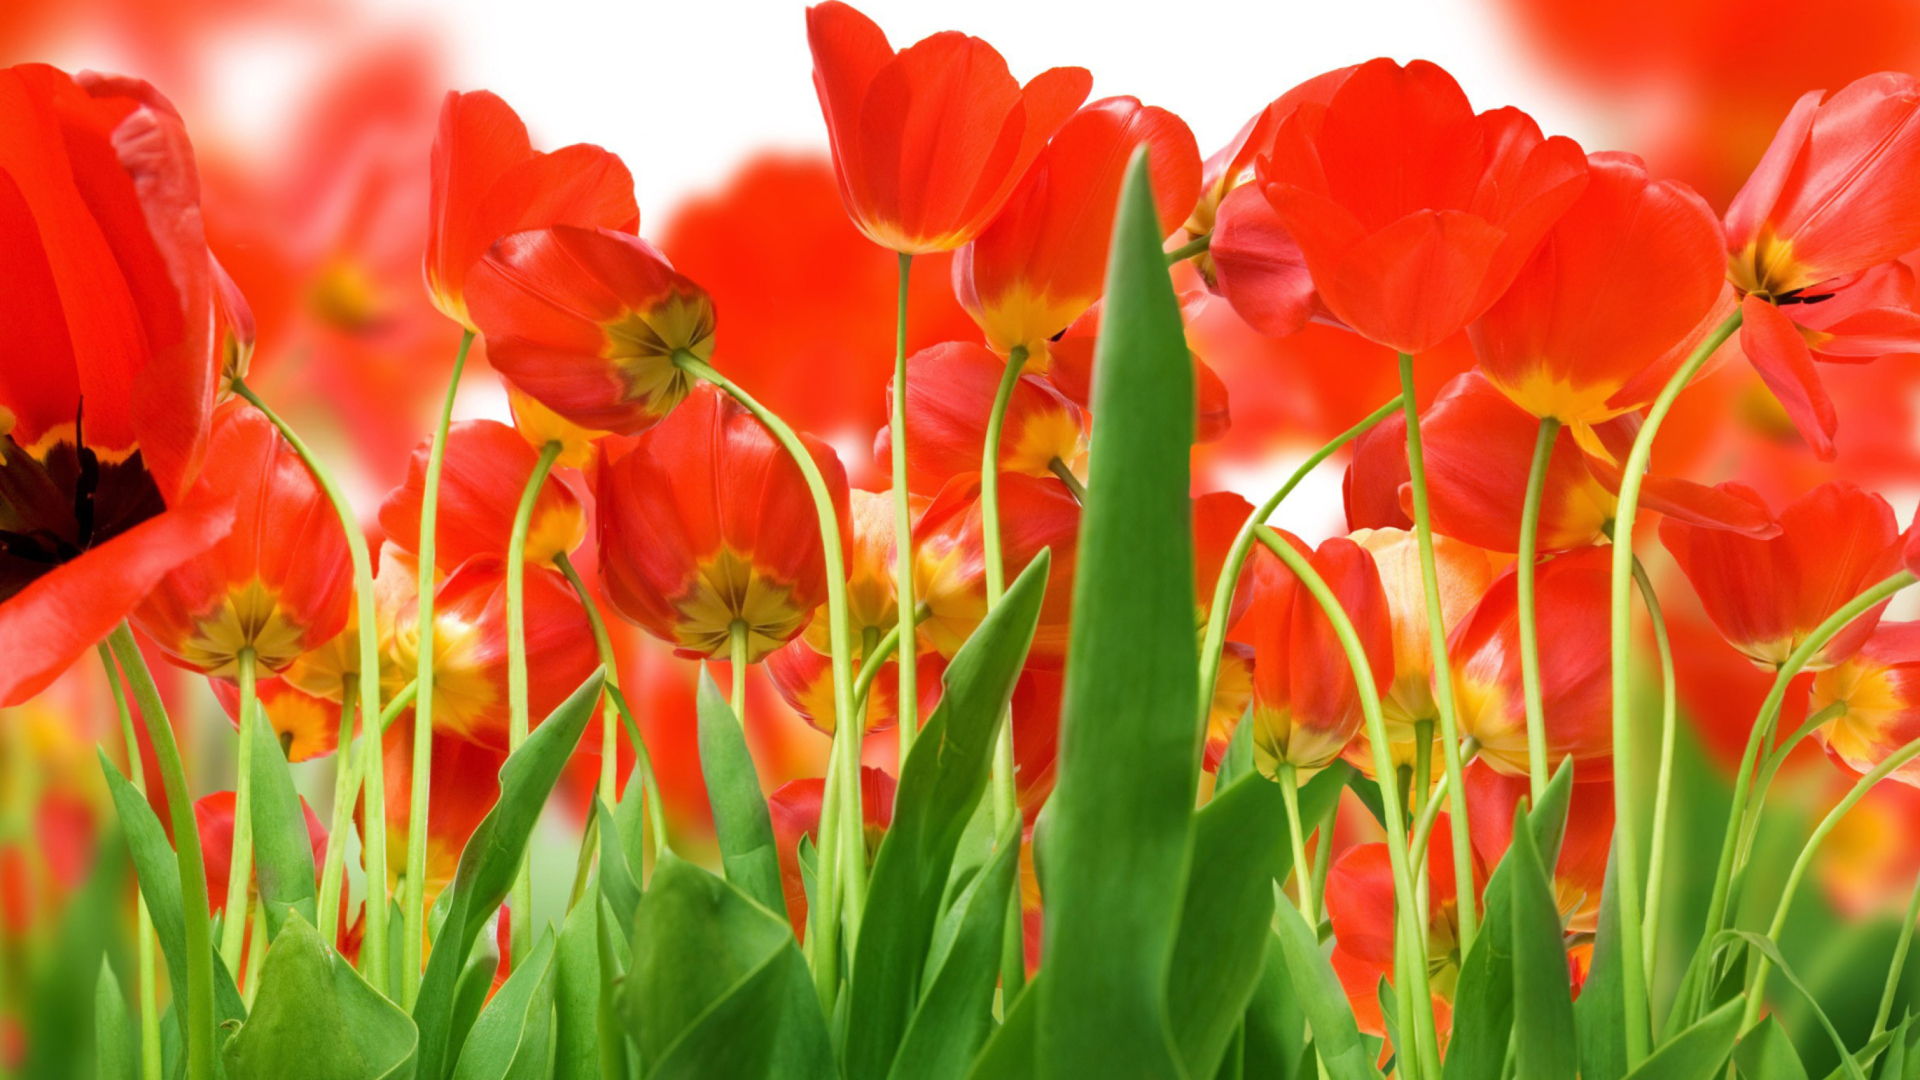 Red Tulips wallpaper 1920x1080